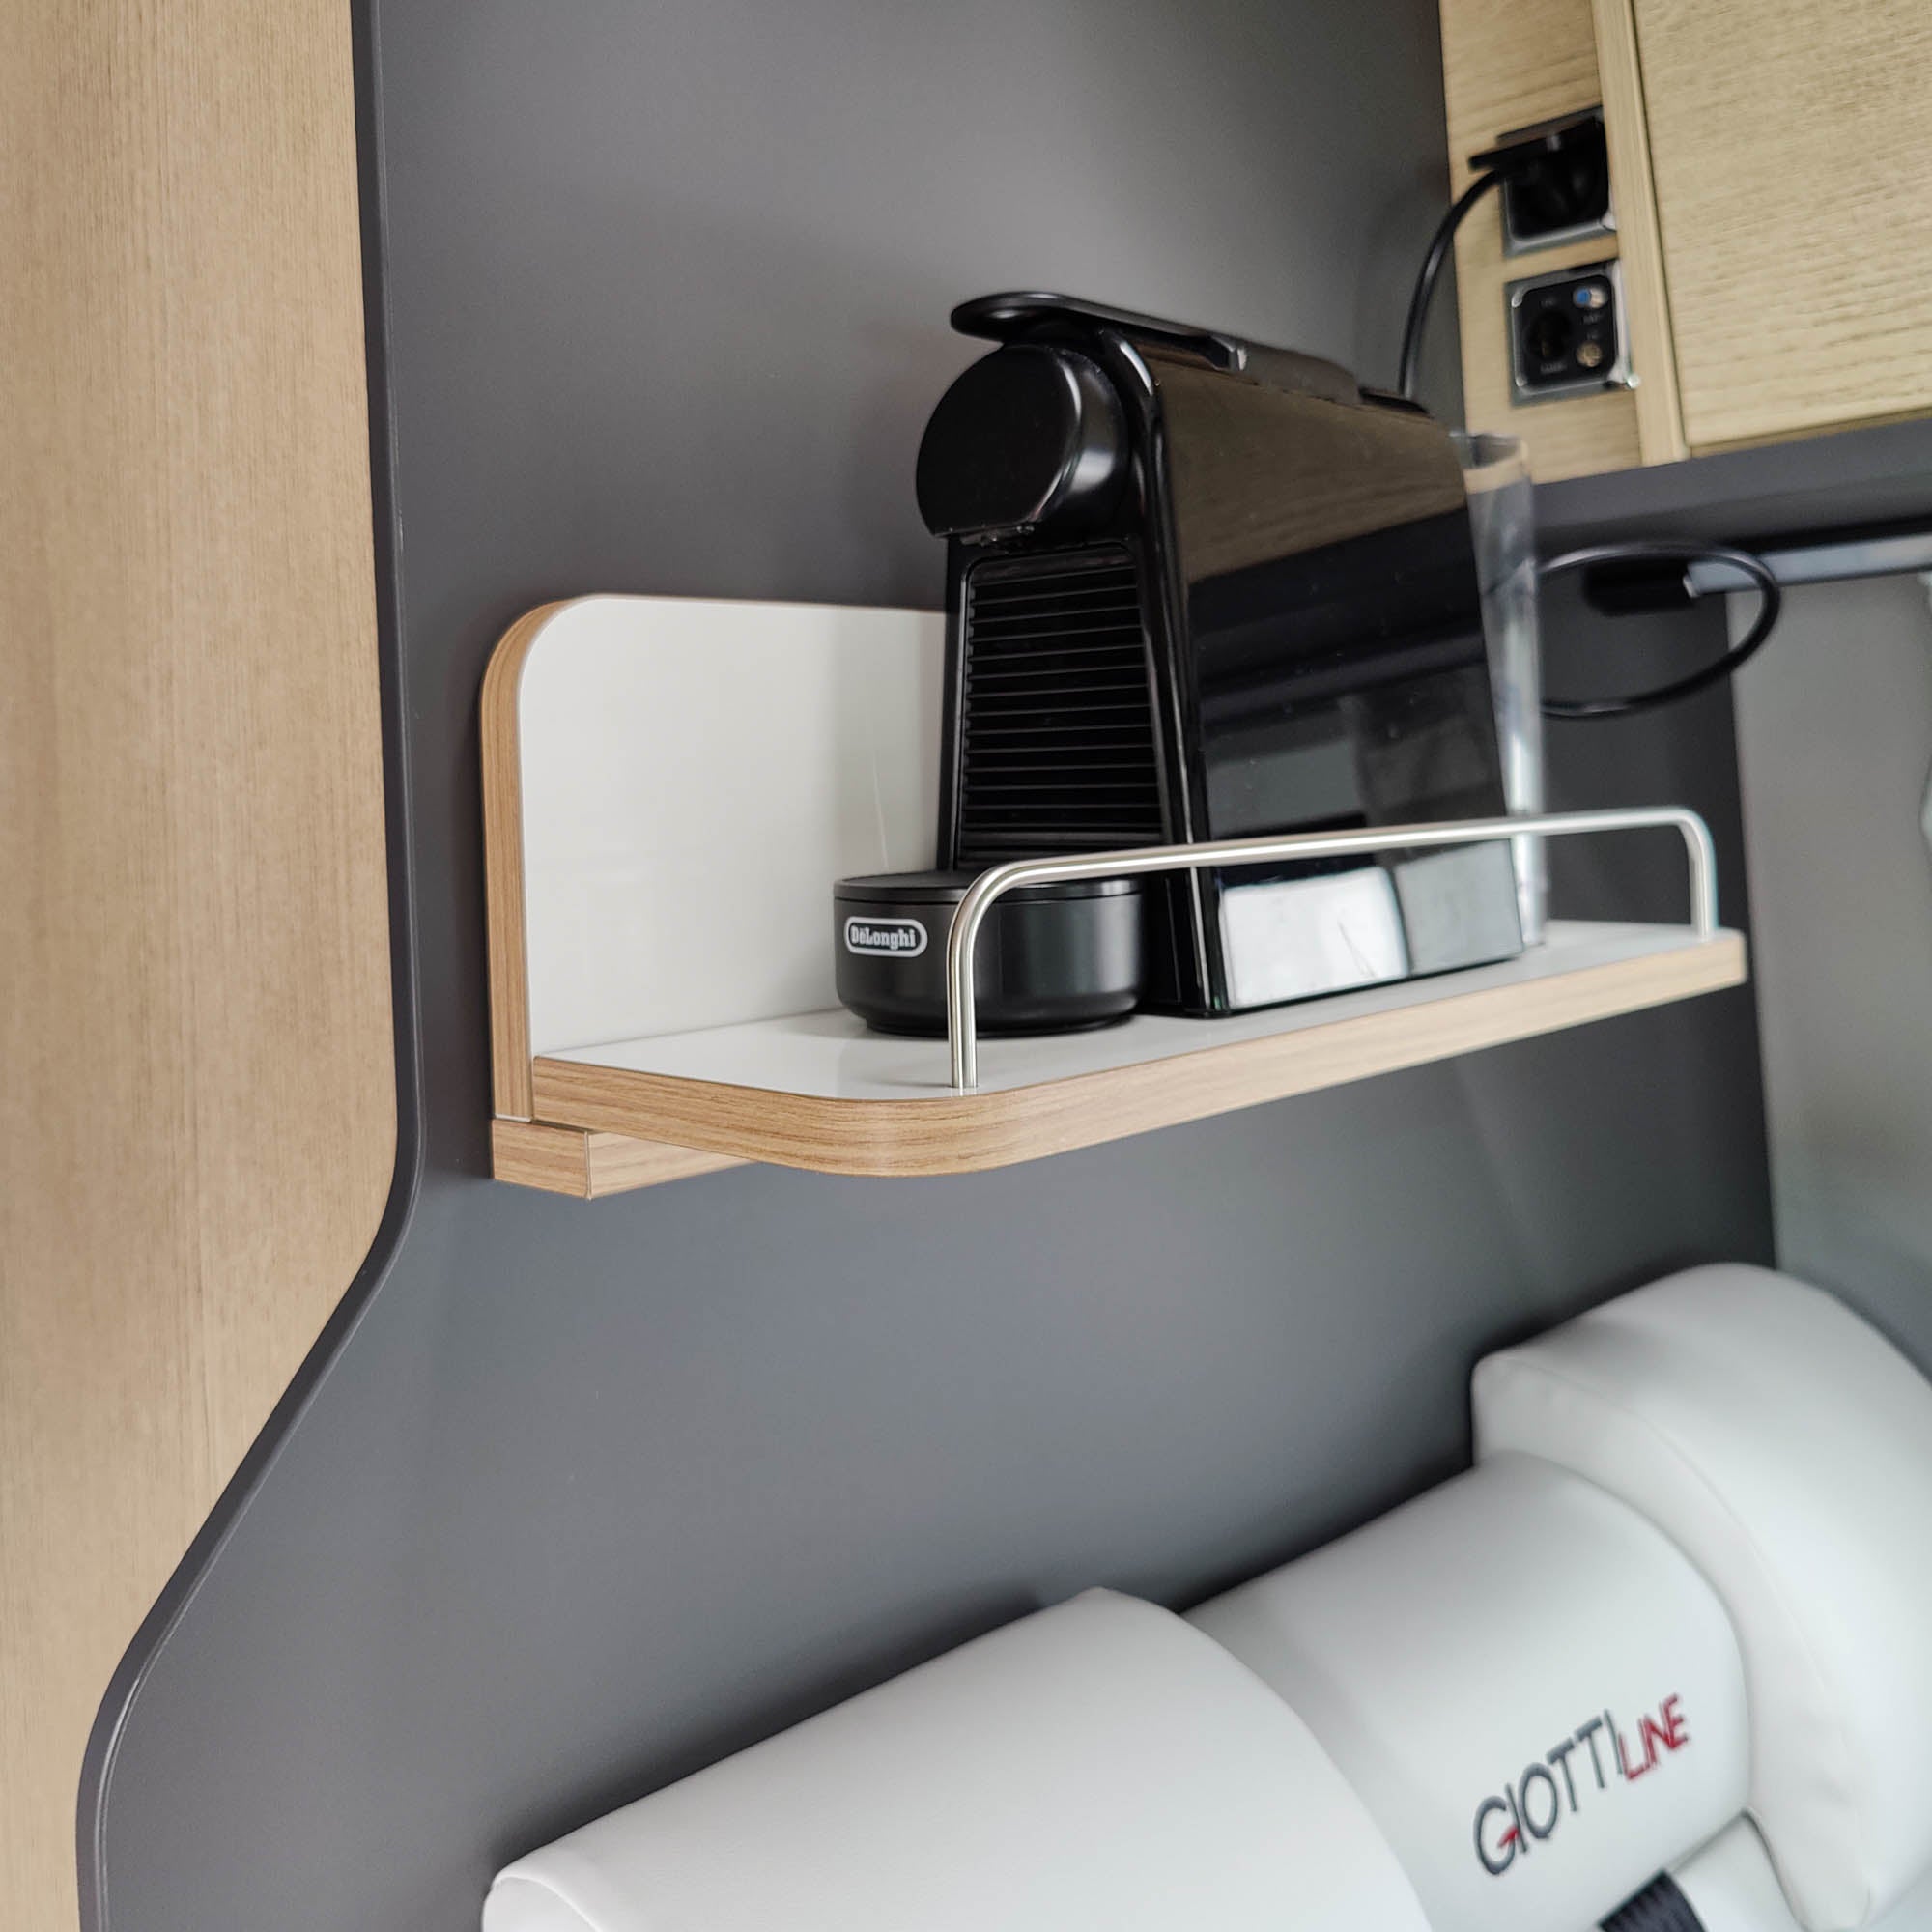 Storage space for the coffee machine in the camper van